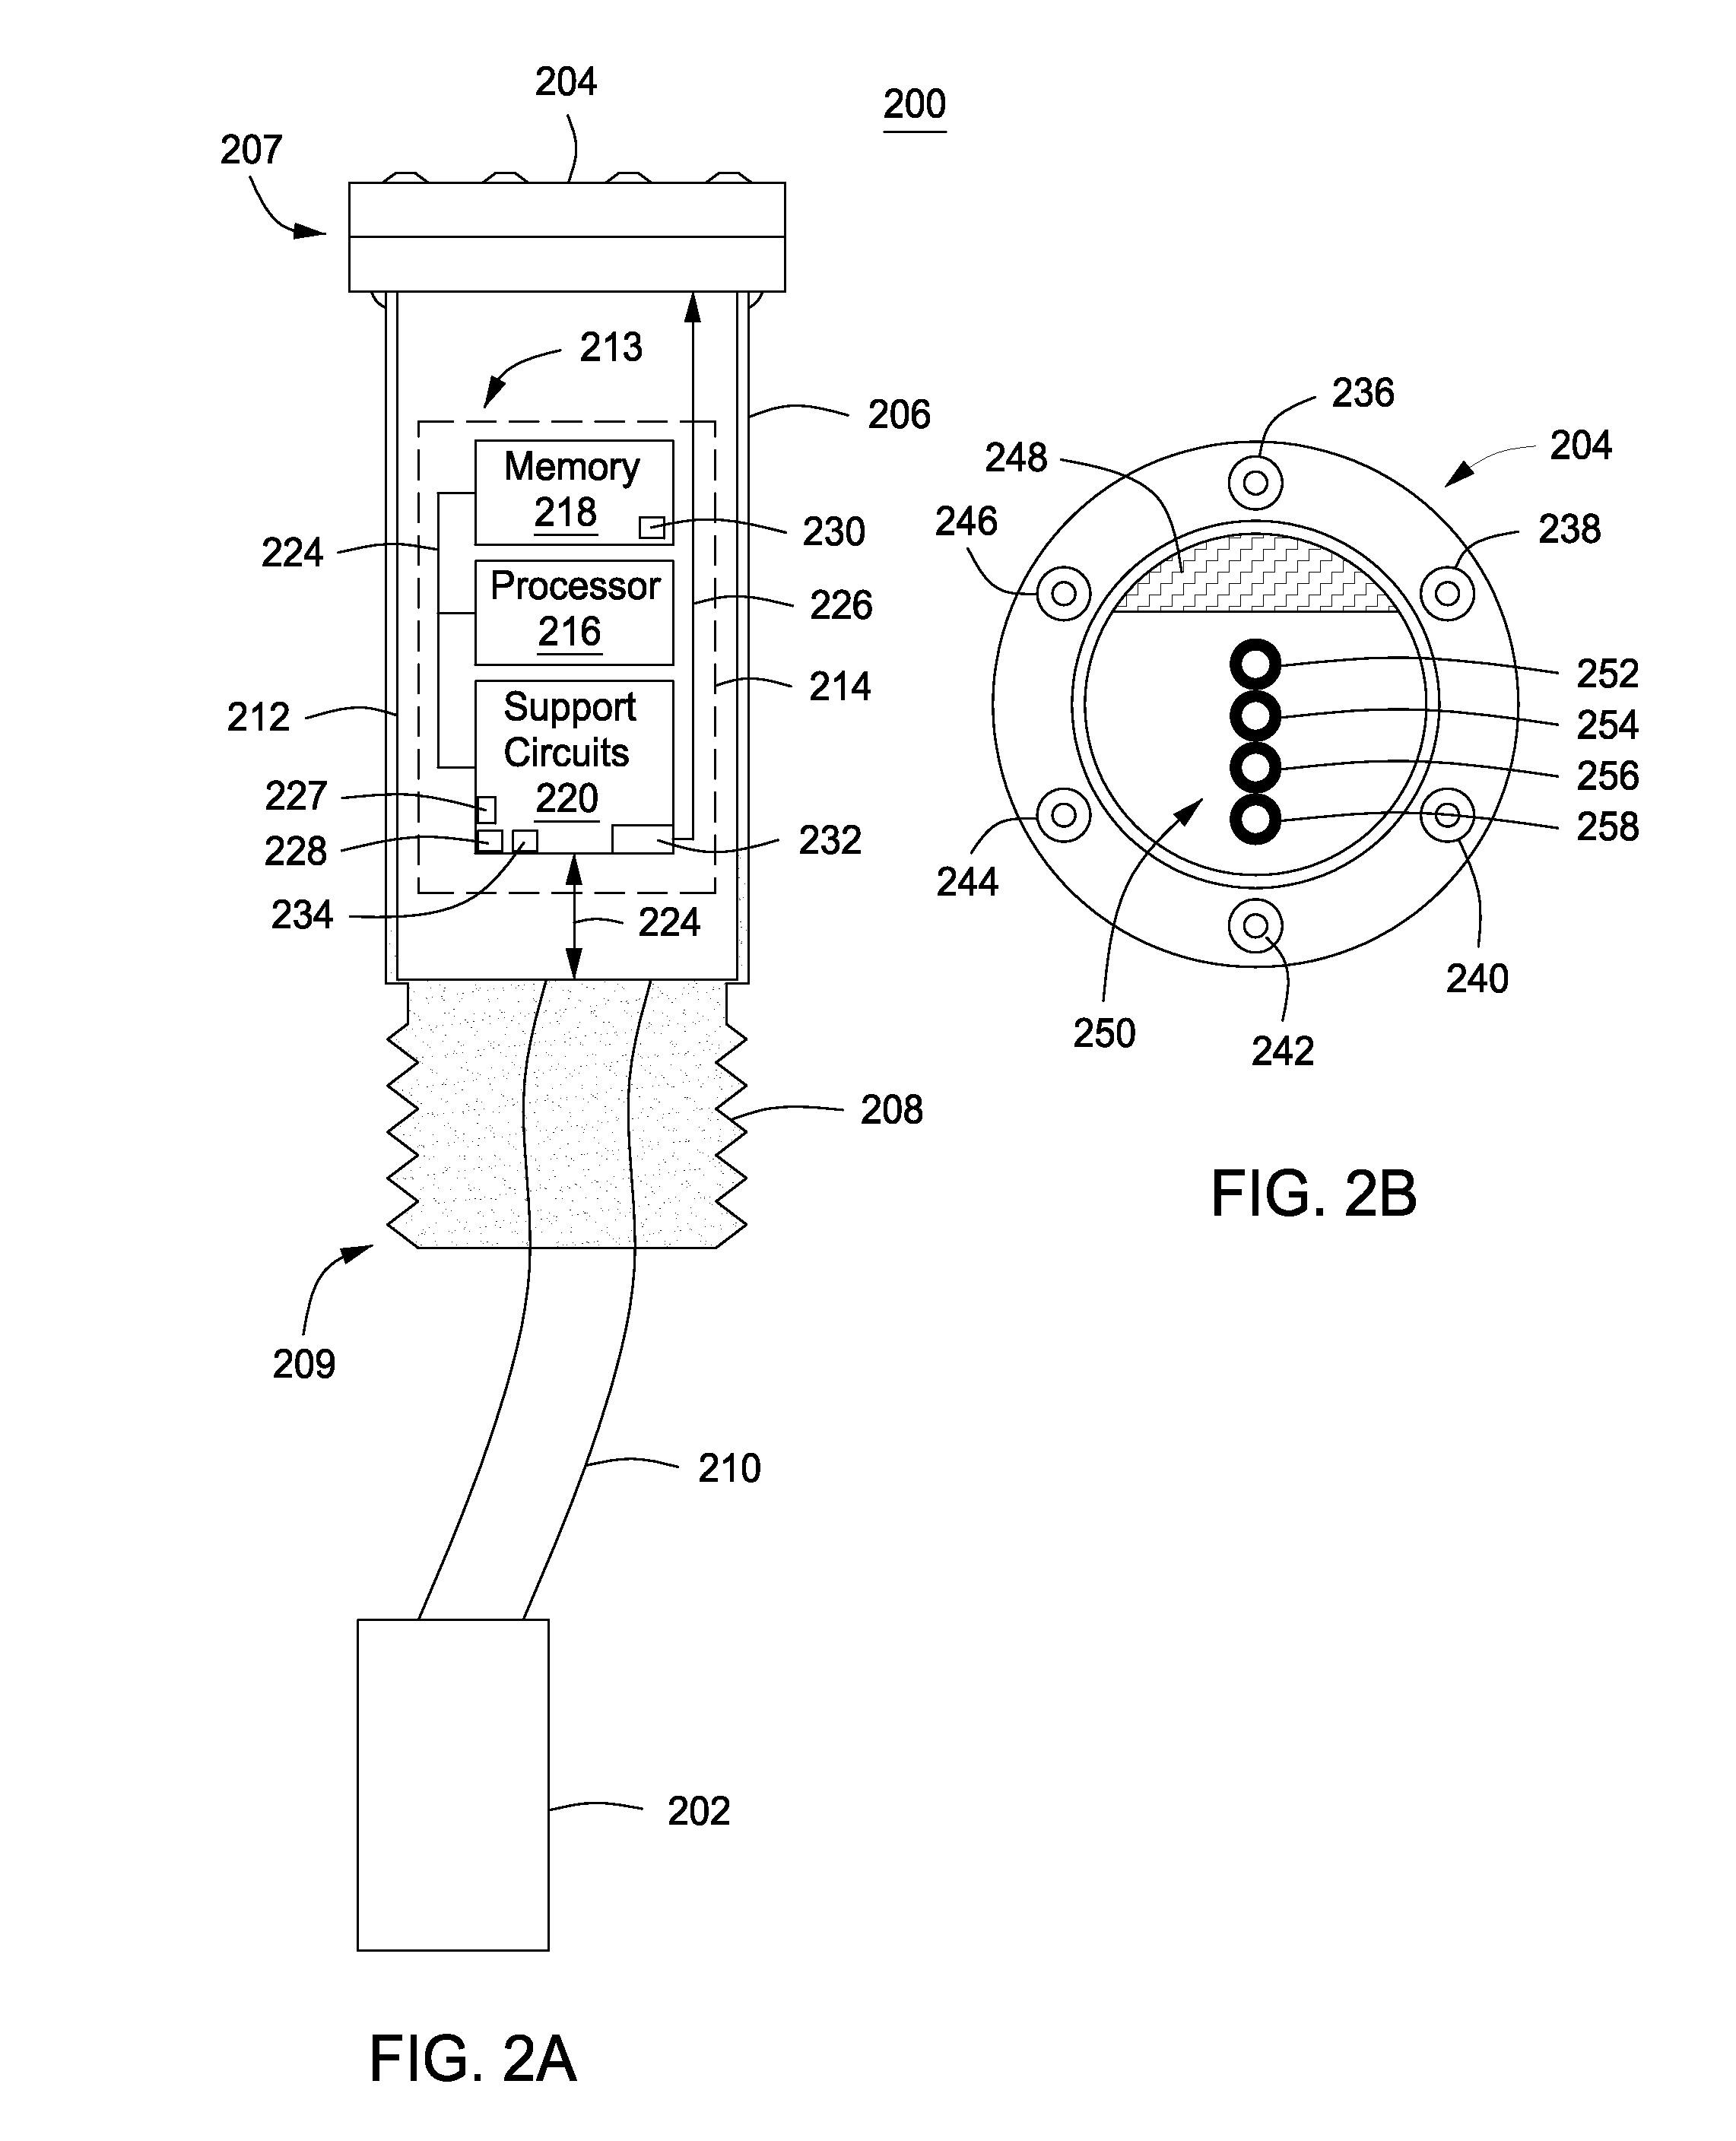 System, Apparatus and Method for Monitoring Accumulation of Fluids in a Containment Tank